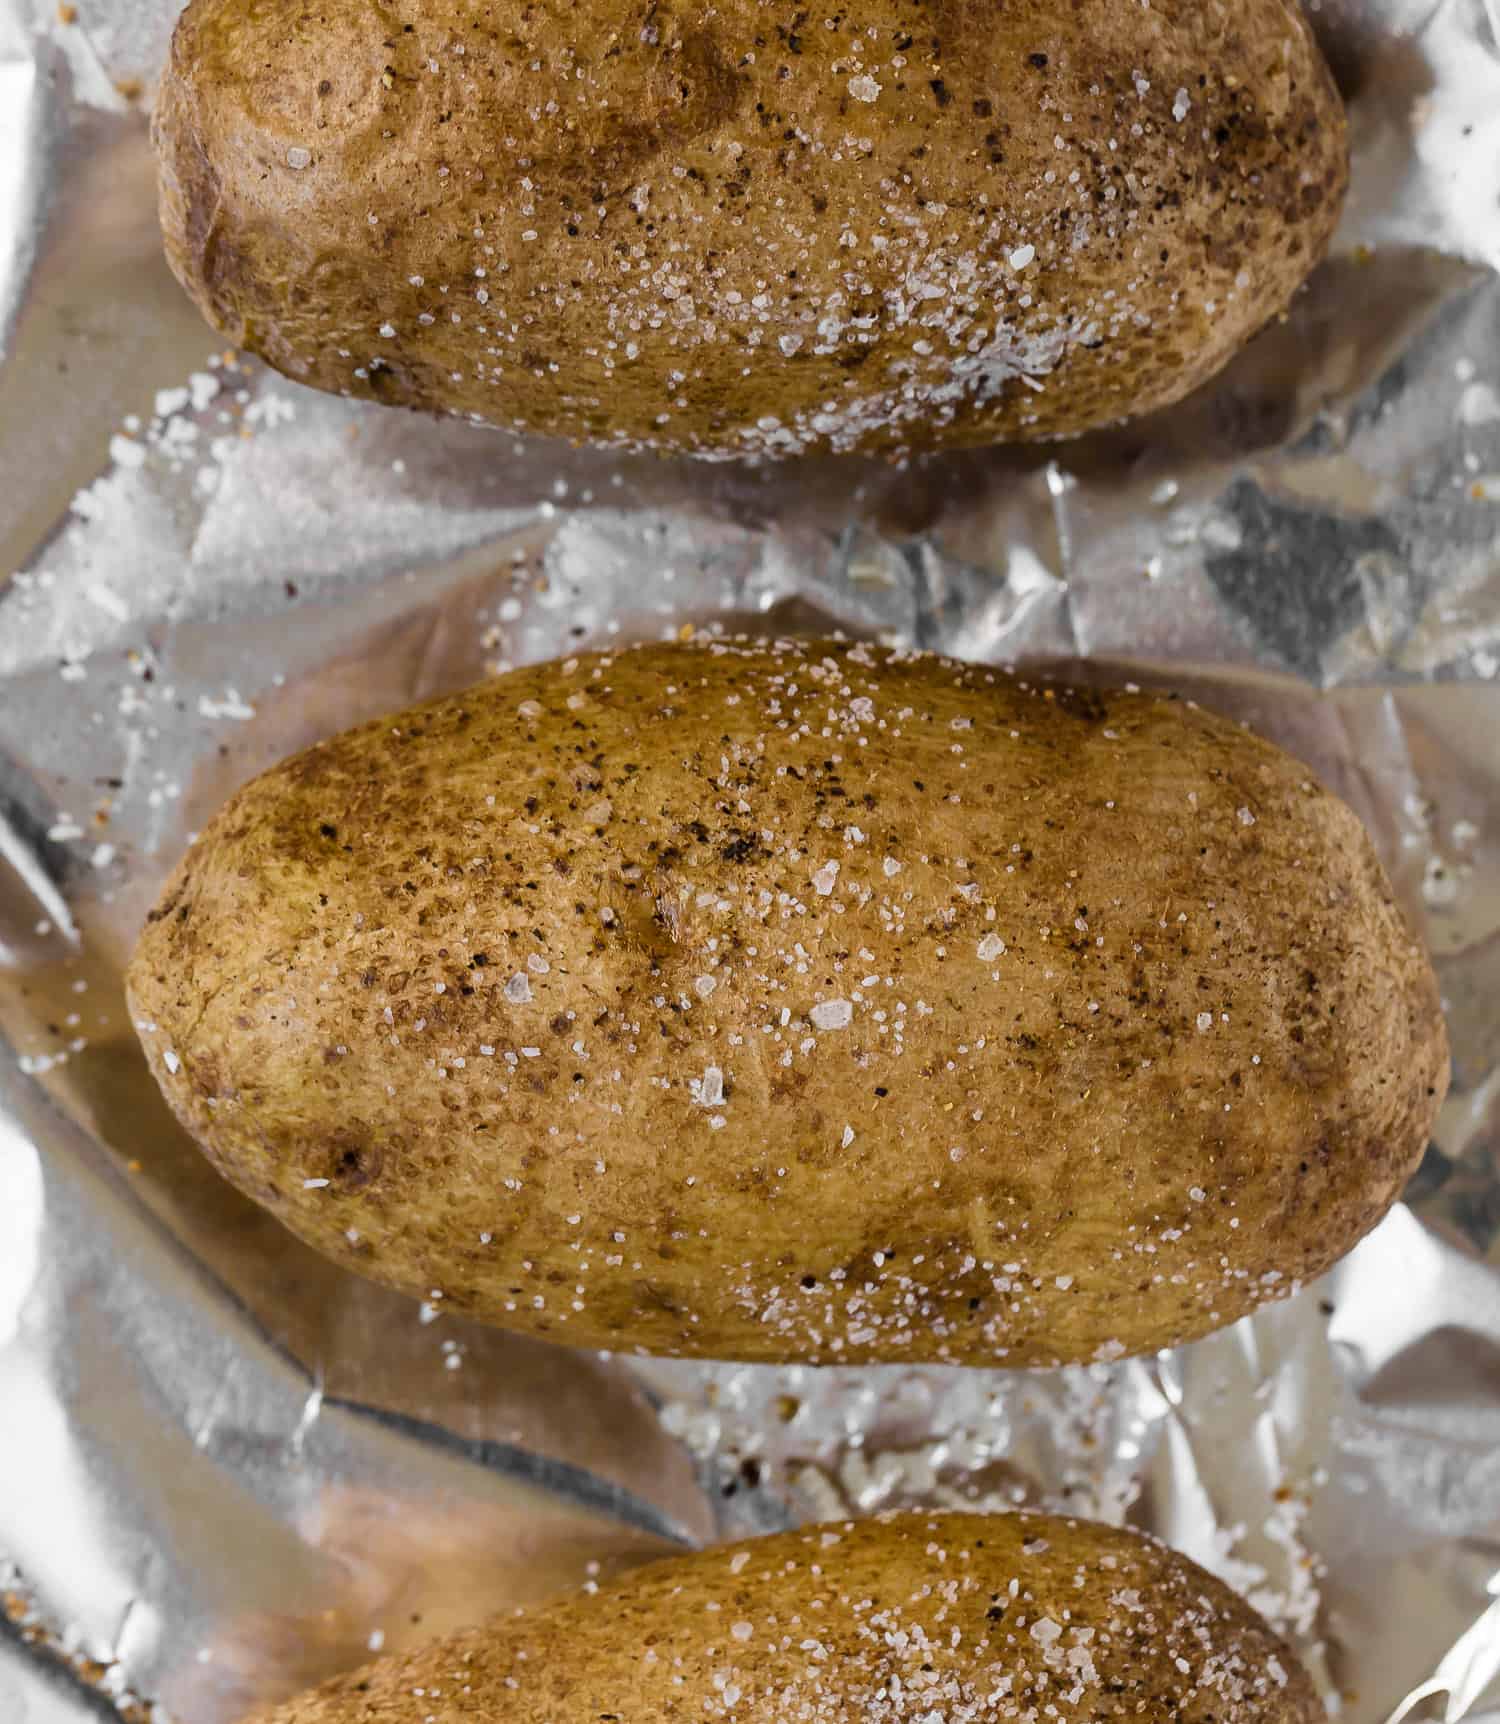 Baked potatoes with salt and pepper.